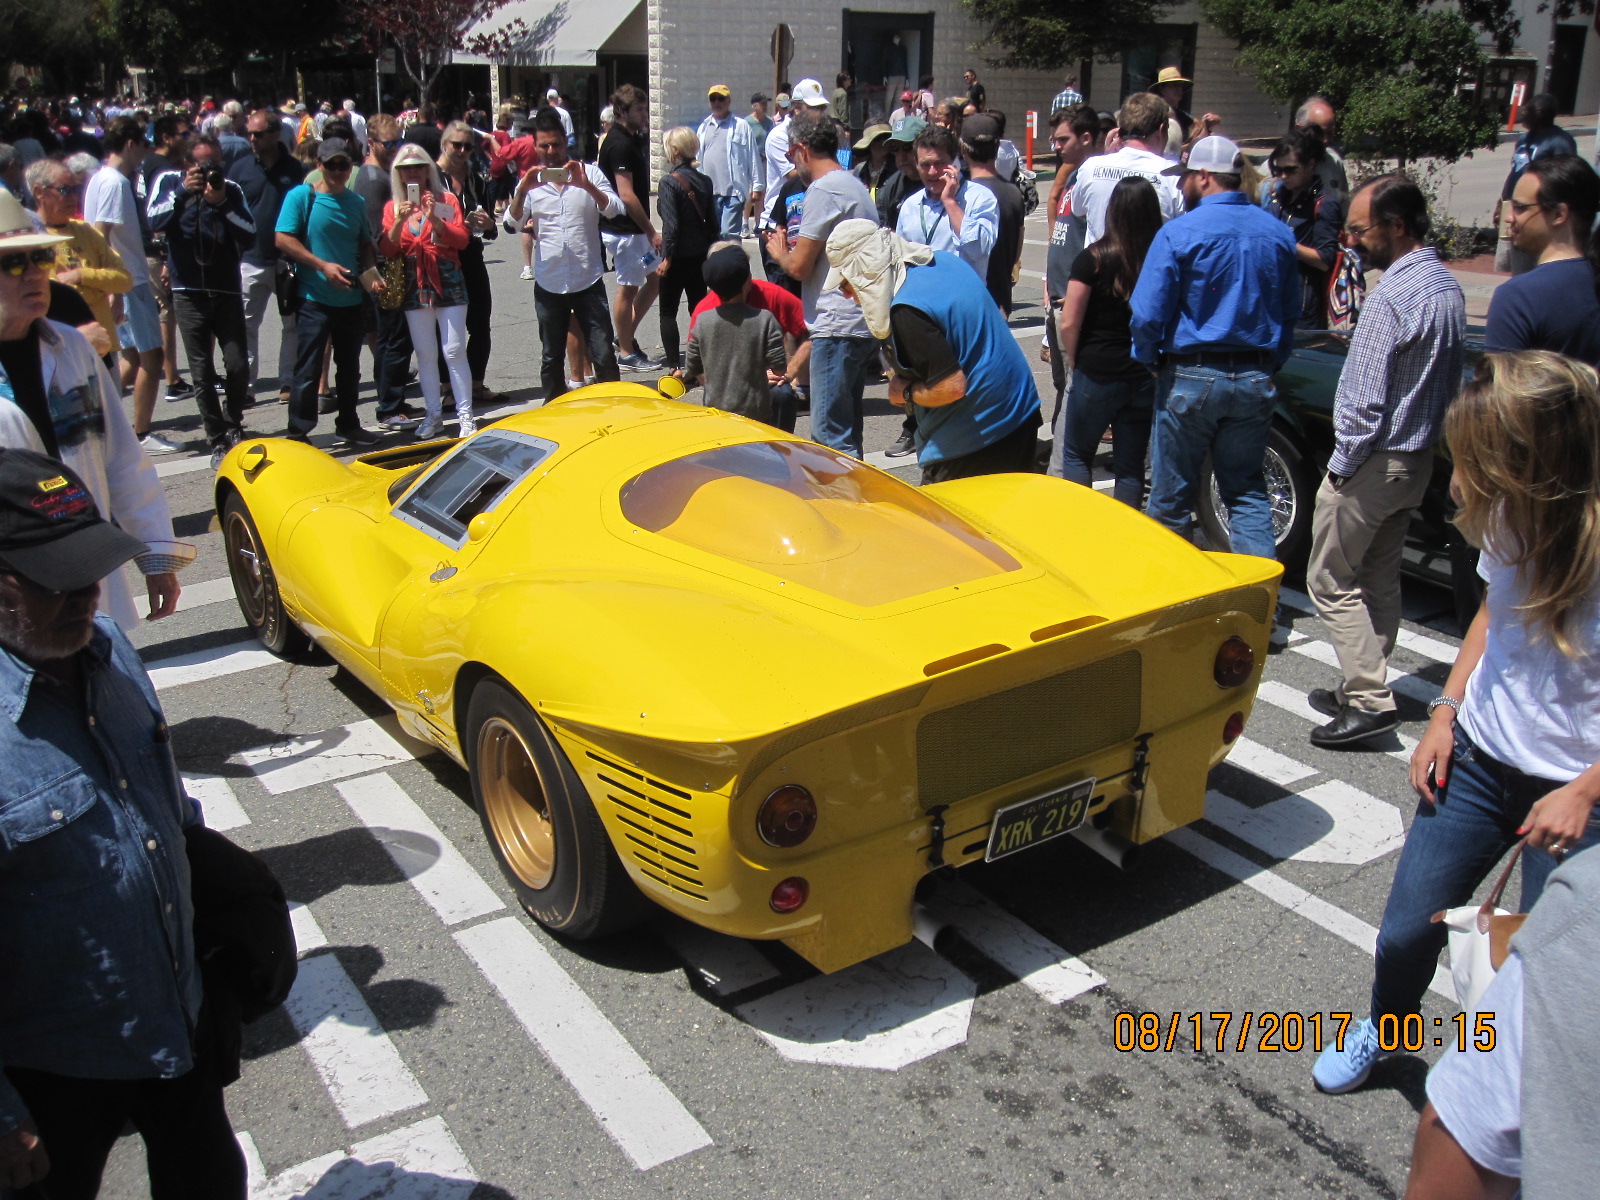 Monterey Car Week 2022 Schedule What Will Monterey Car Week Be Like This Year? - Mycarquest.com